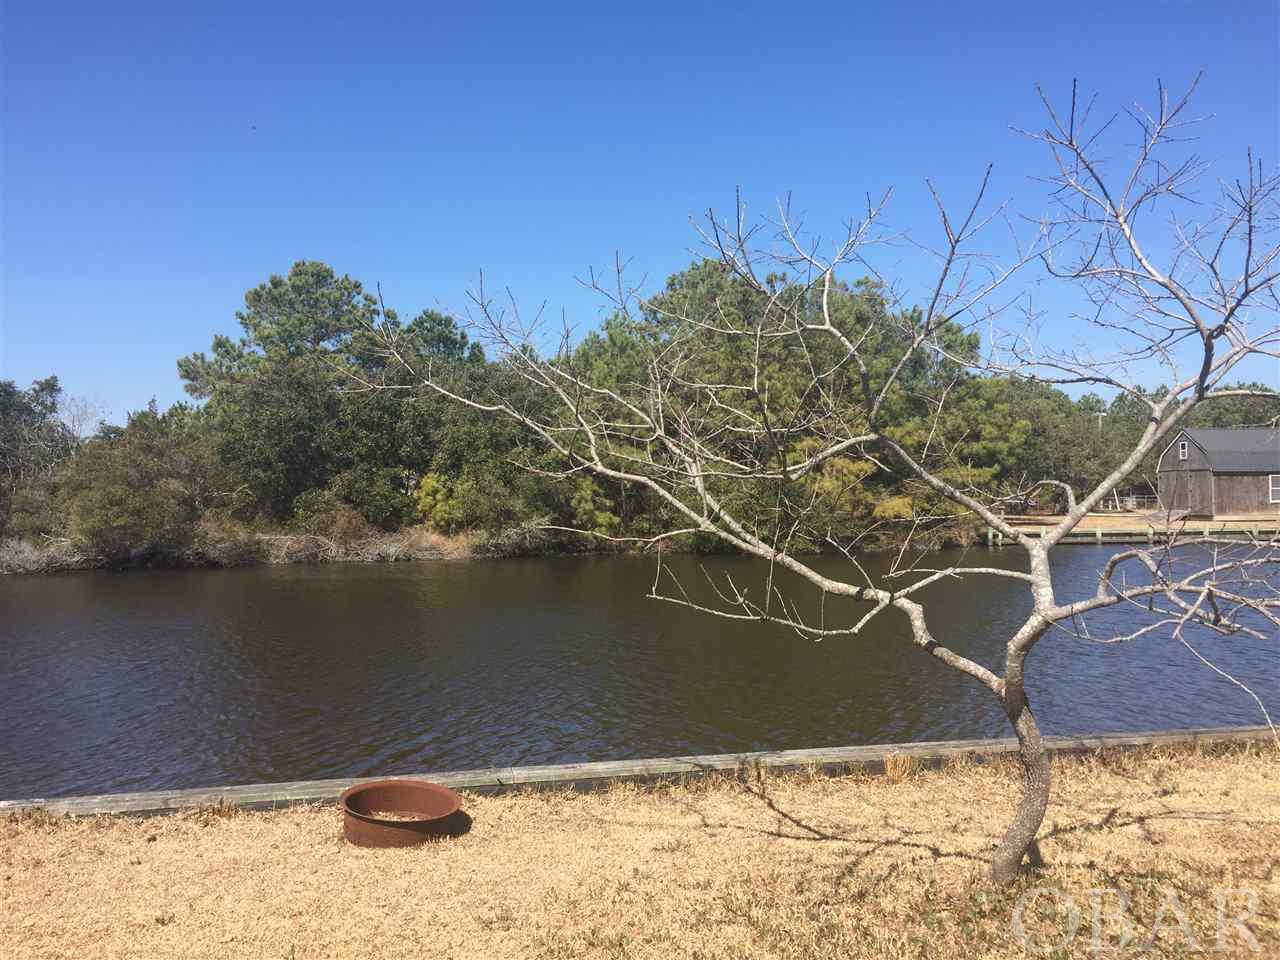 505 Brant Road, Corolla, NC 27927, ,Lots/land,For sale,Brant Road,113869